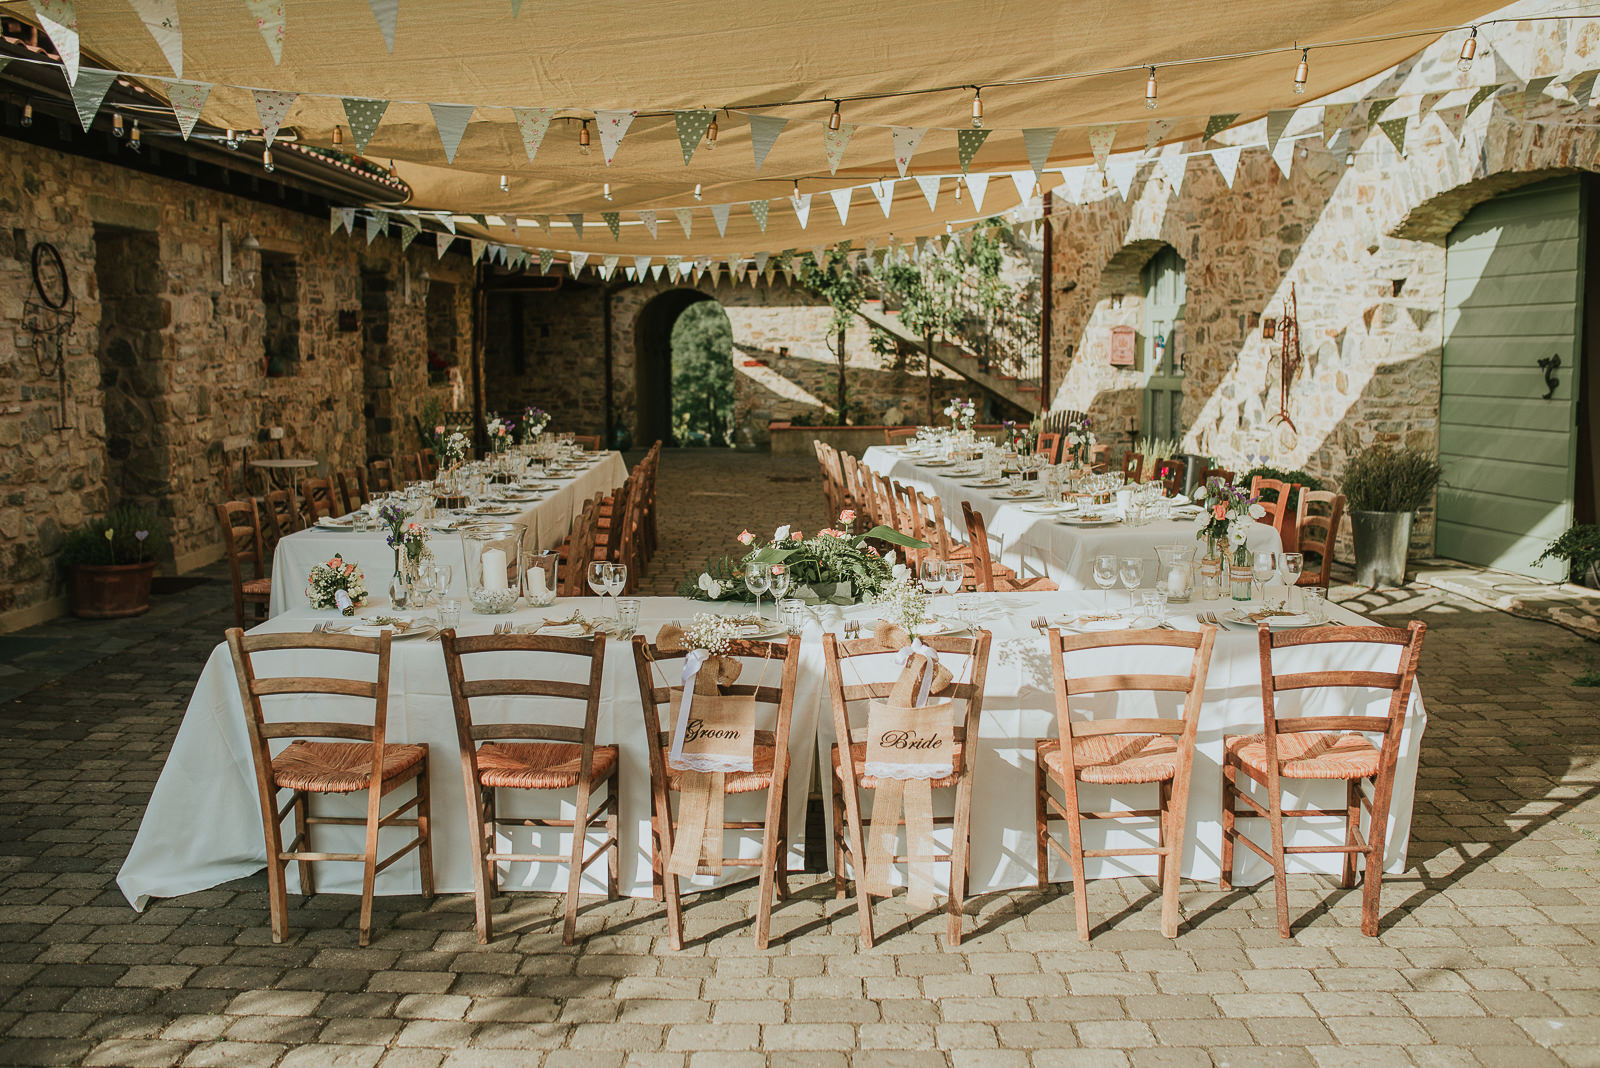 table setup ideas for destination wedding in Italy Tuscany